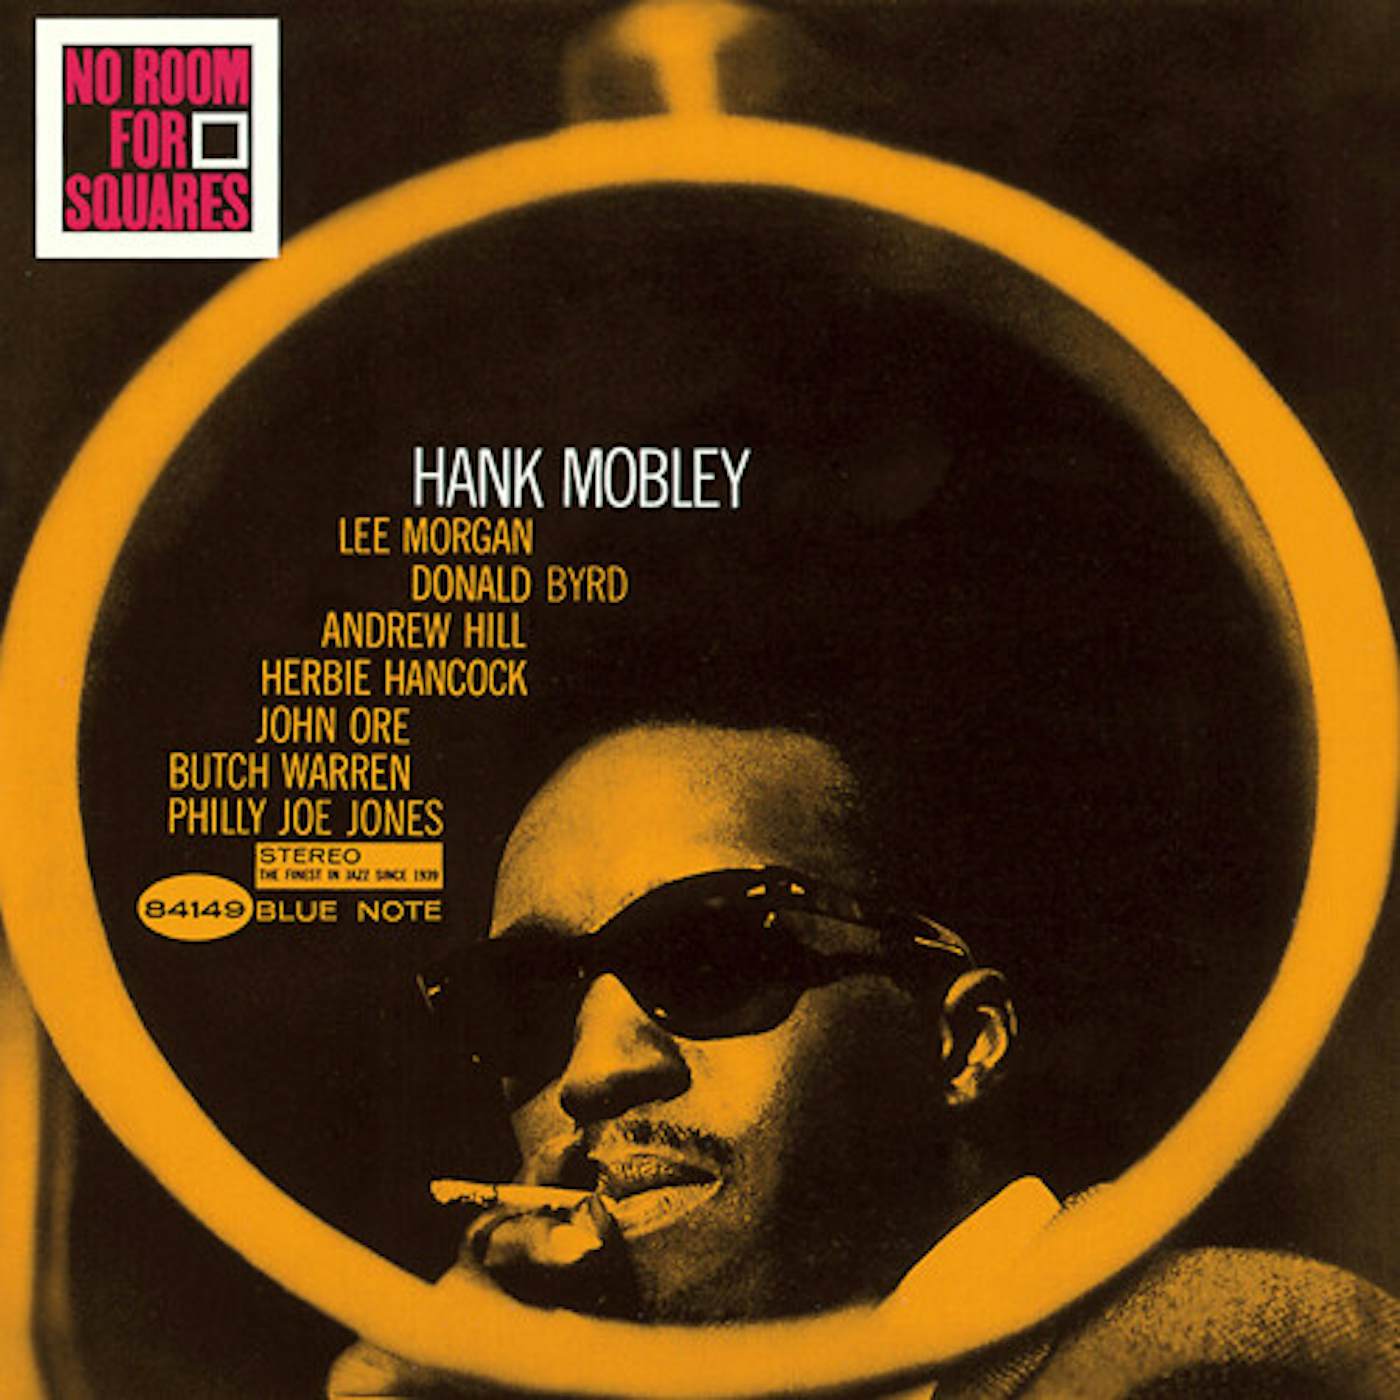 Hank Mobley NO ROOM FOR SQUARES CD